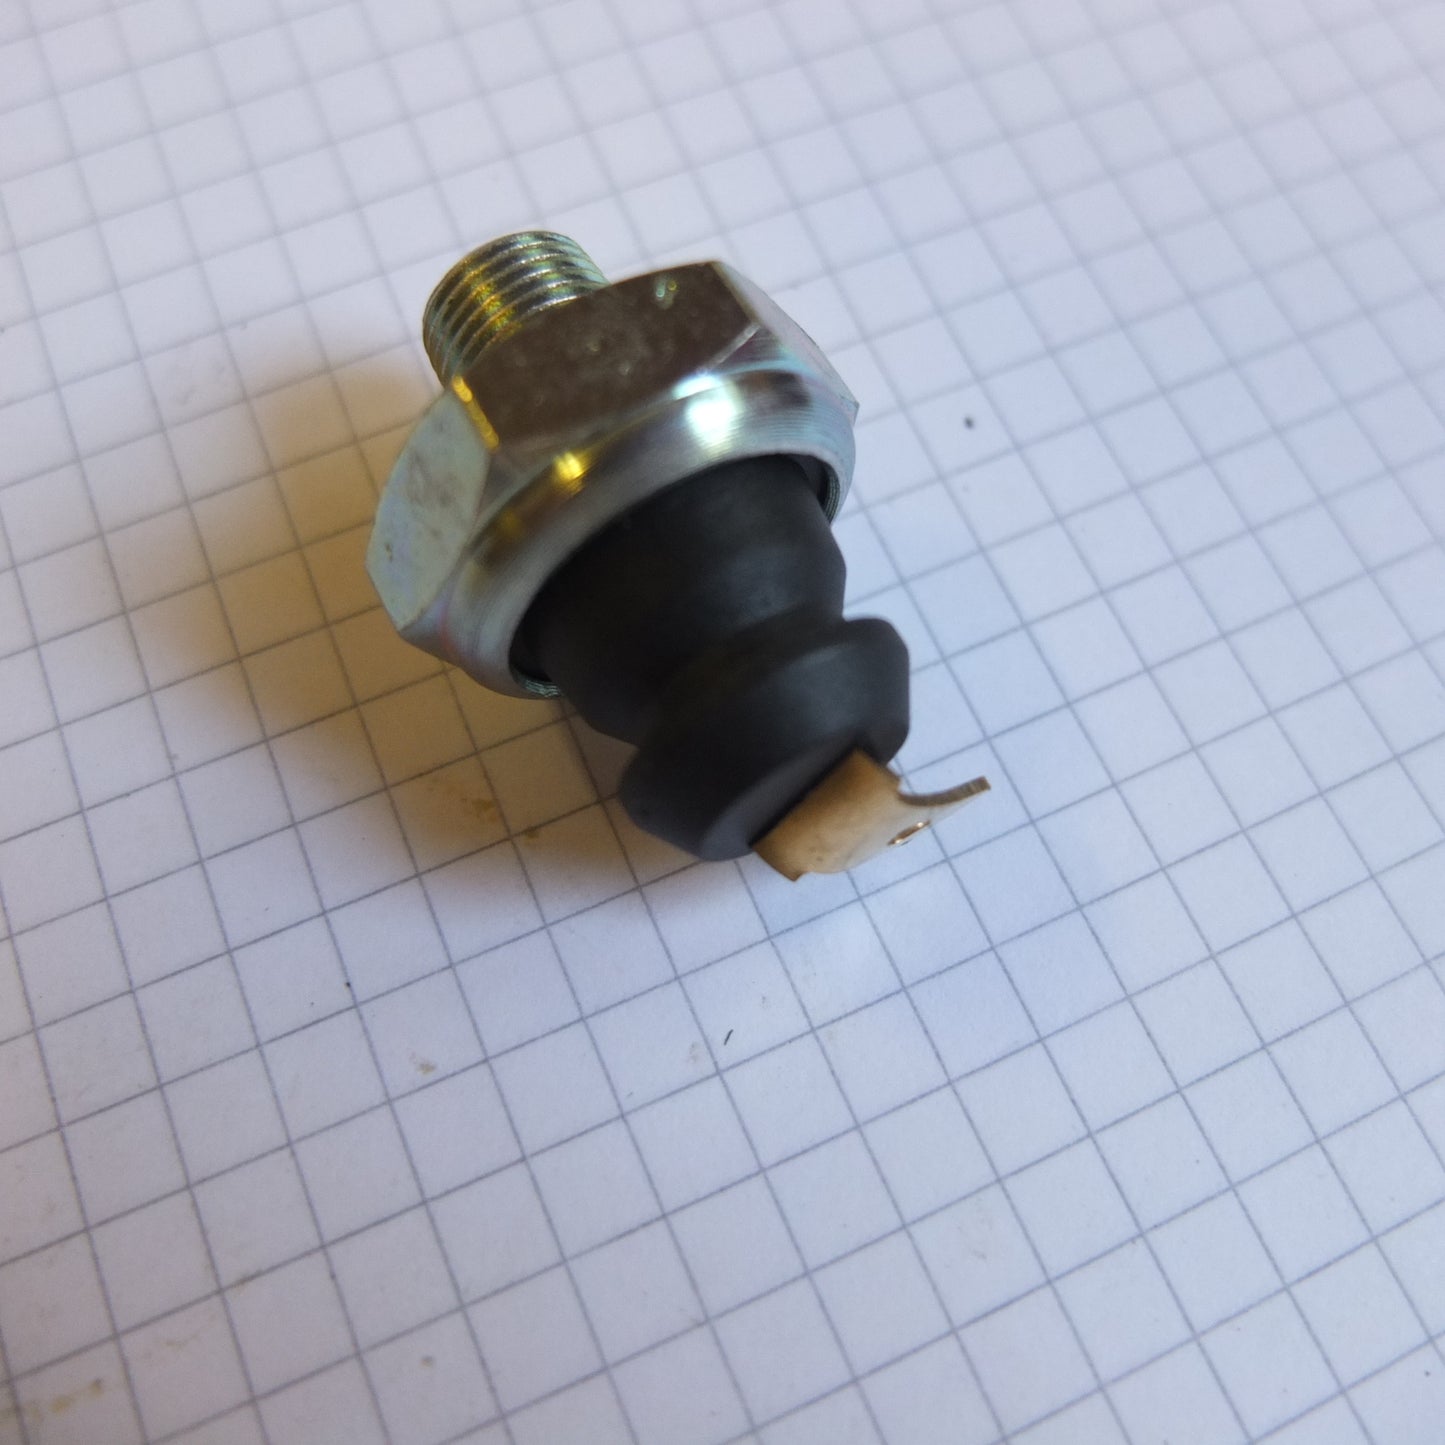 P1/096 Oil switch and adaptor